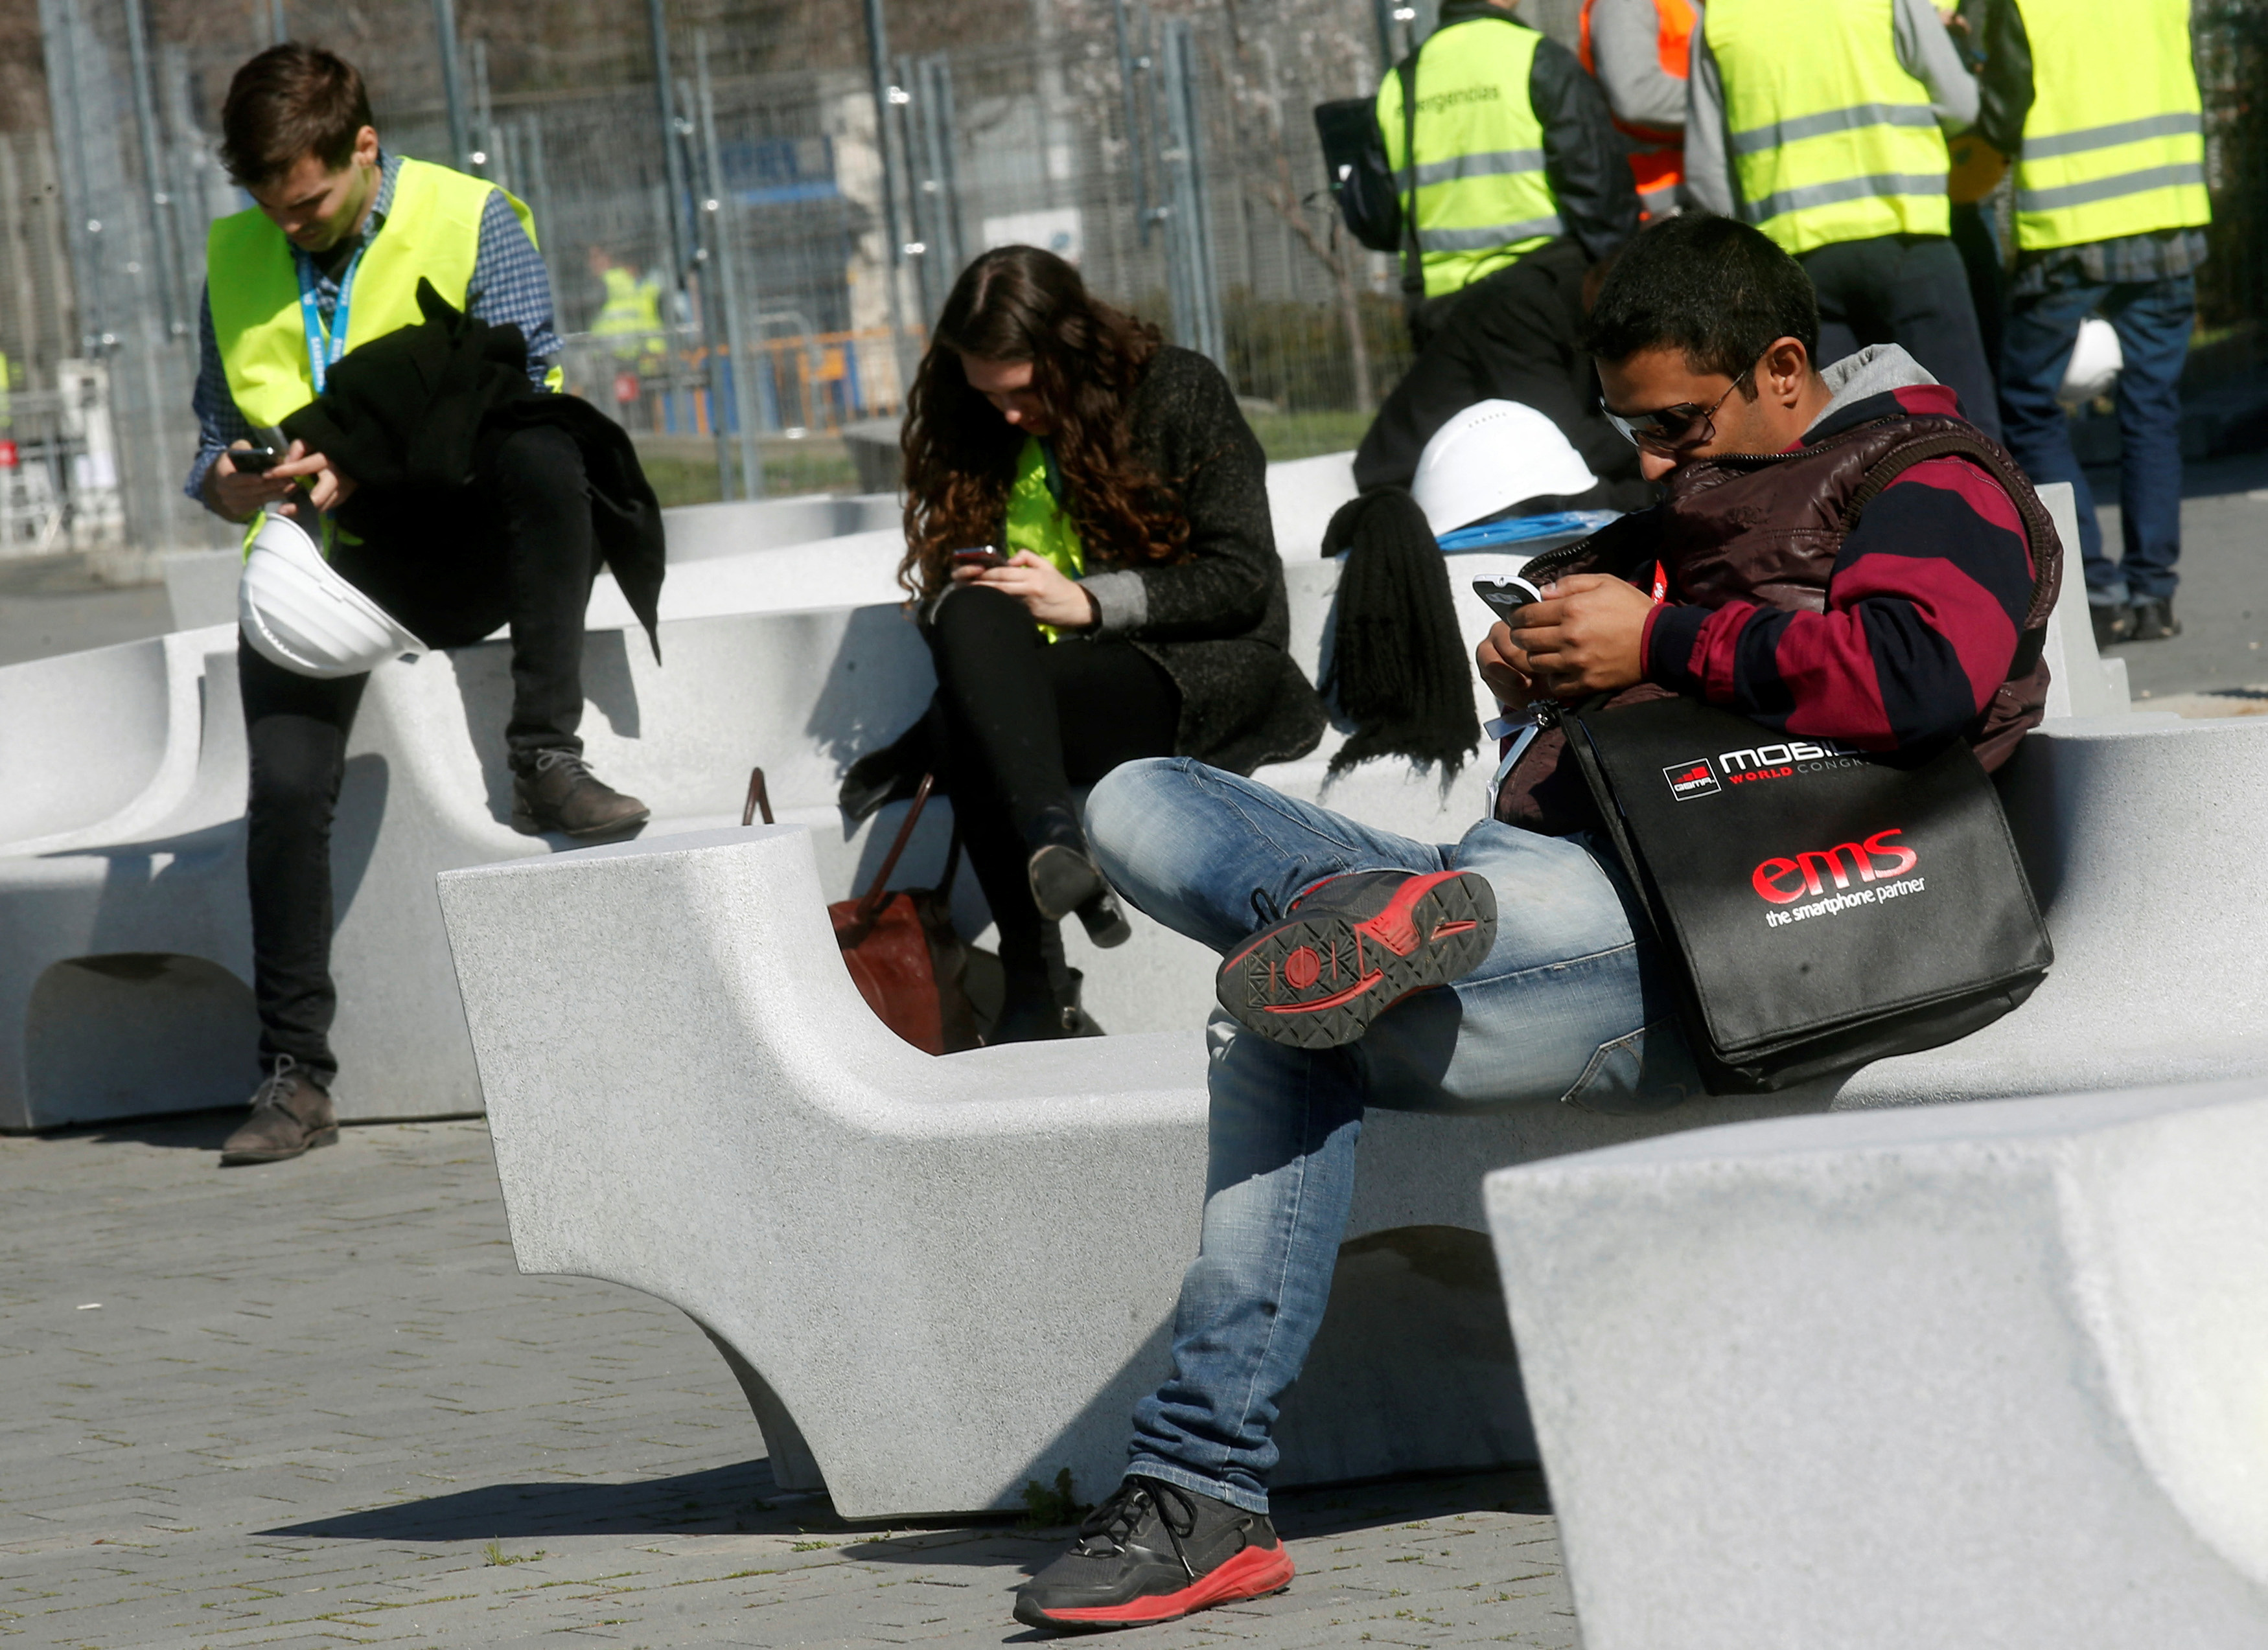 People use their mobile phones near the entrance to Mobile World Congress in Barcelona